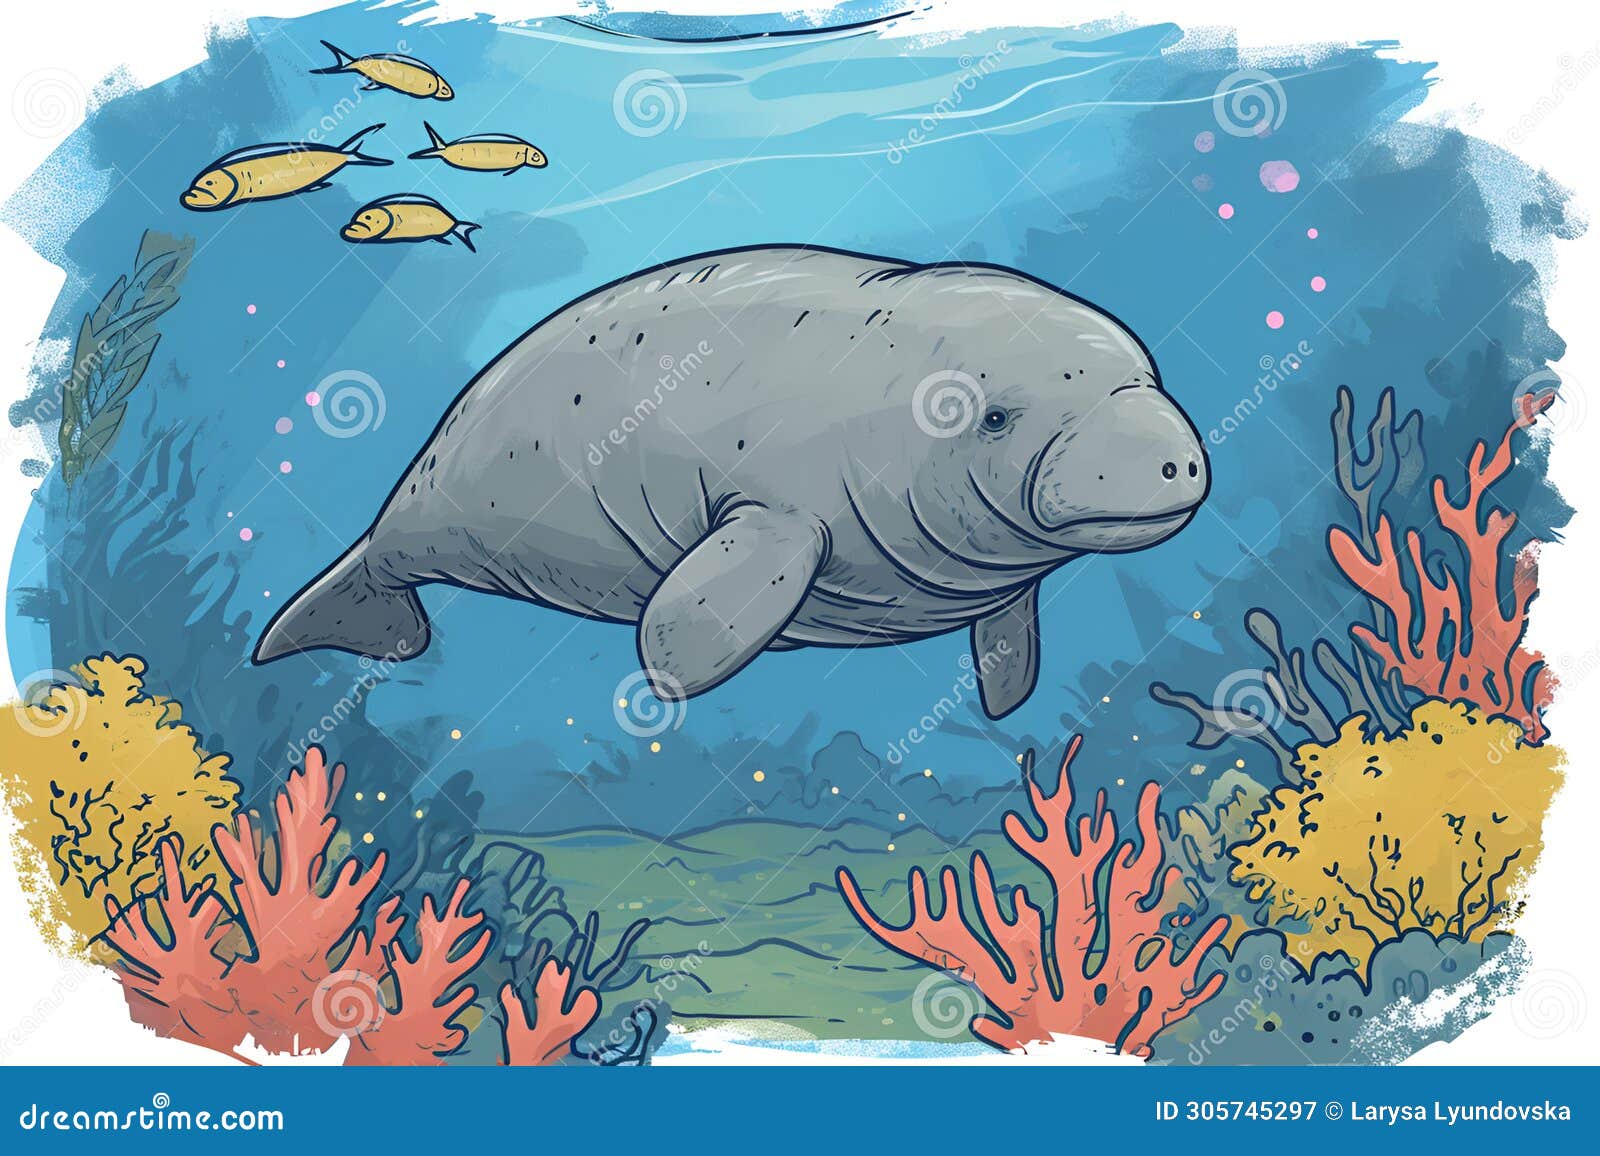 dugong or sea cow in the blue warm sea against the backdrop of corals.